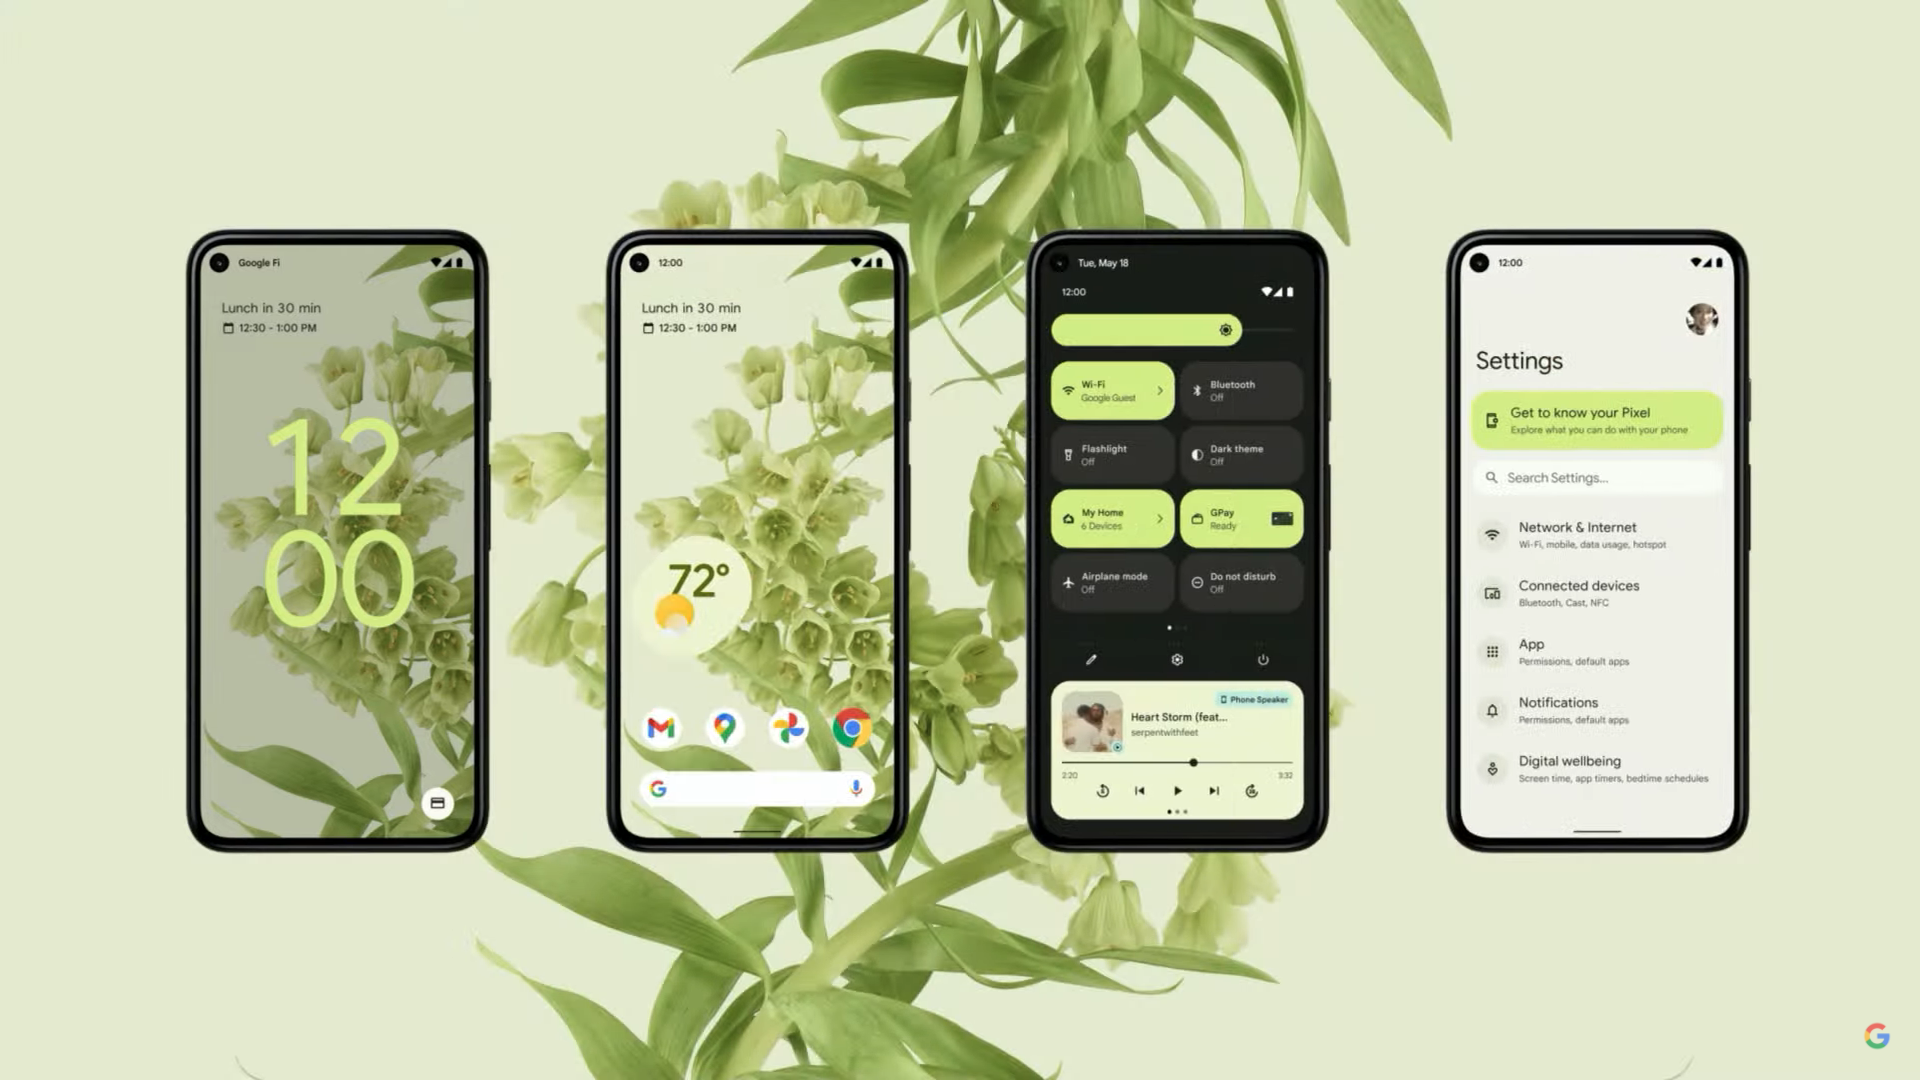 Android 12 UI from Google I/O 2021